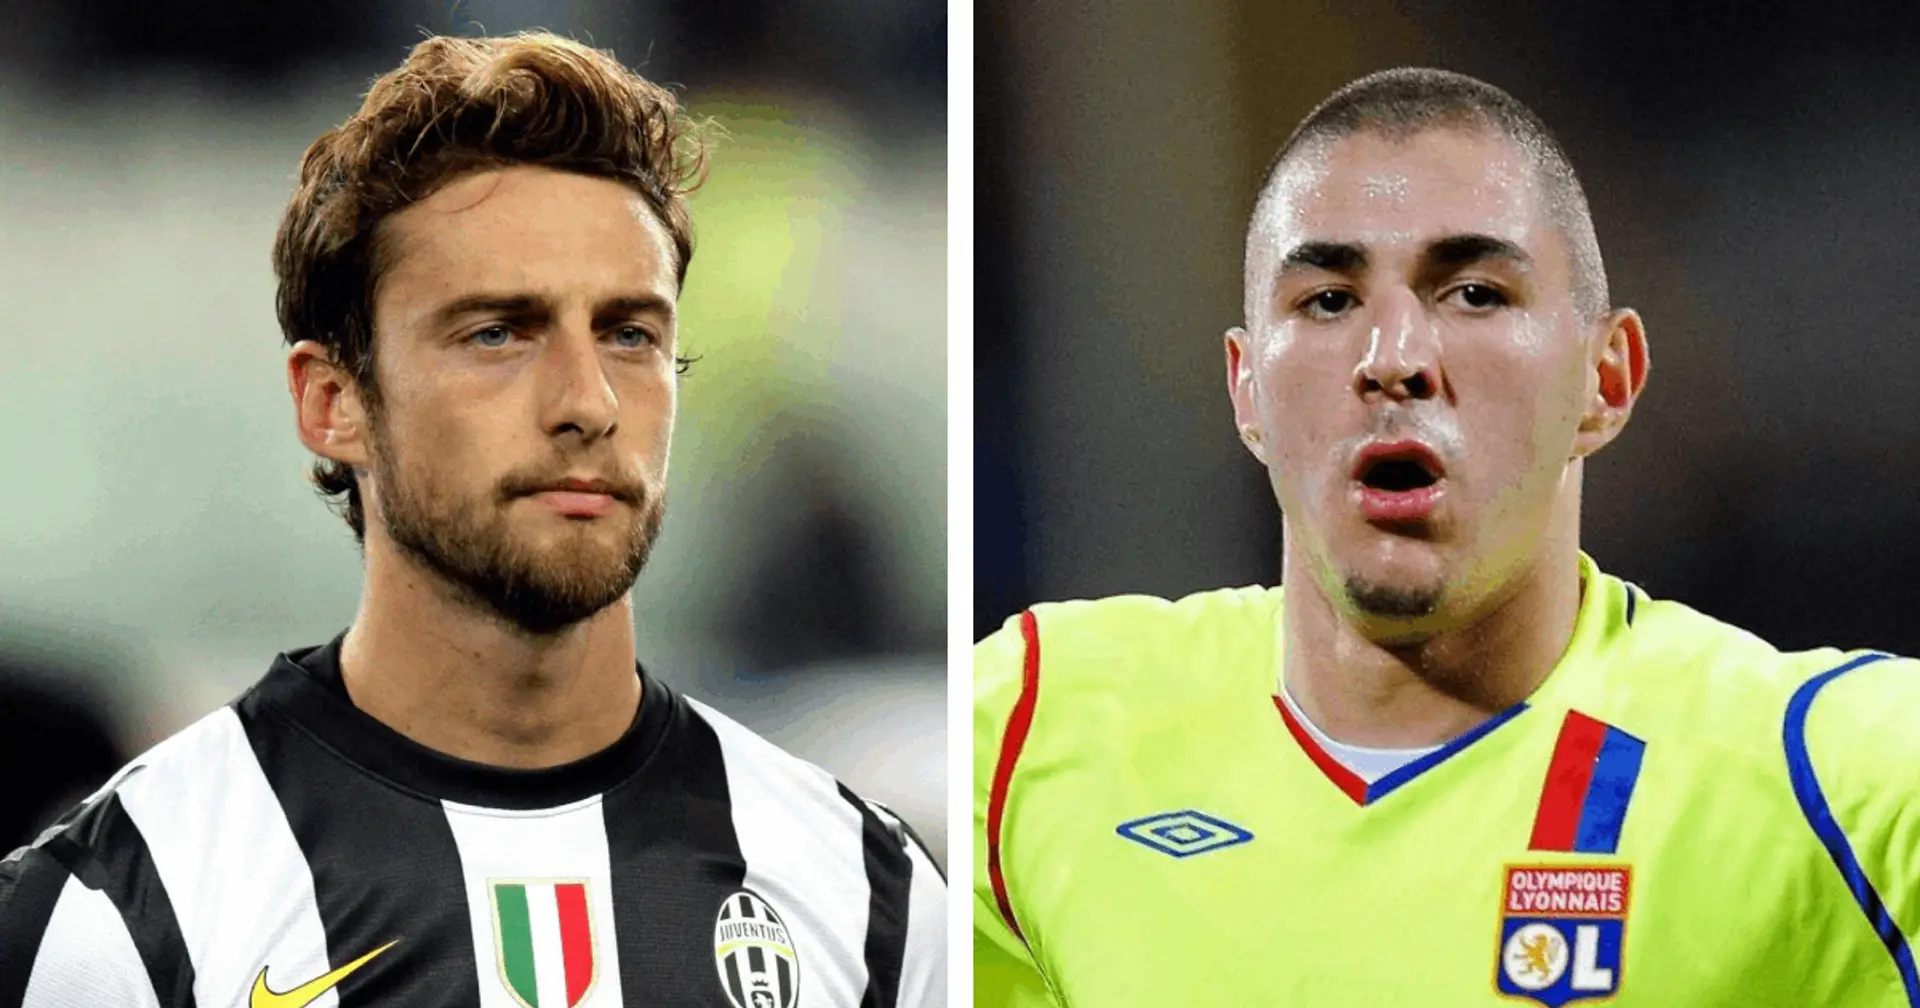 Claudio Marchisio: Benzema was close to joining Juve from Lyon